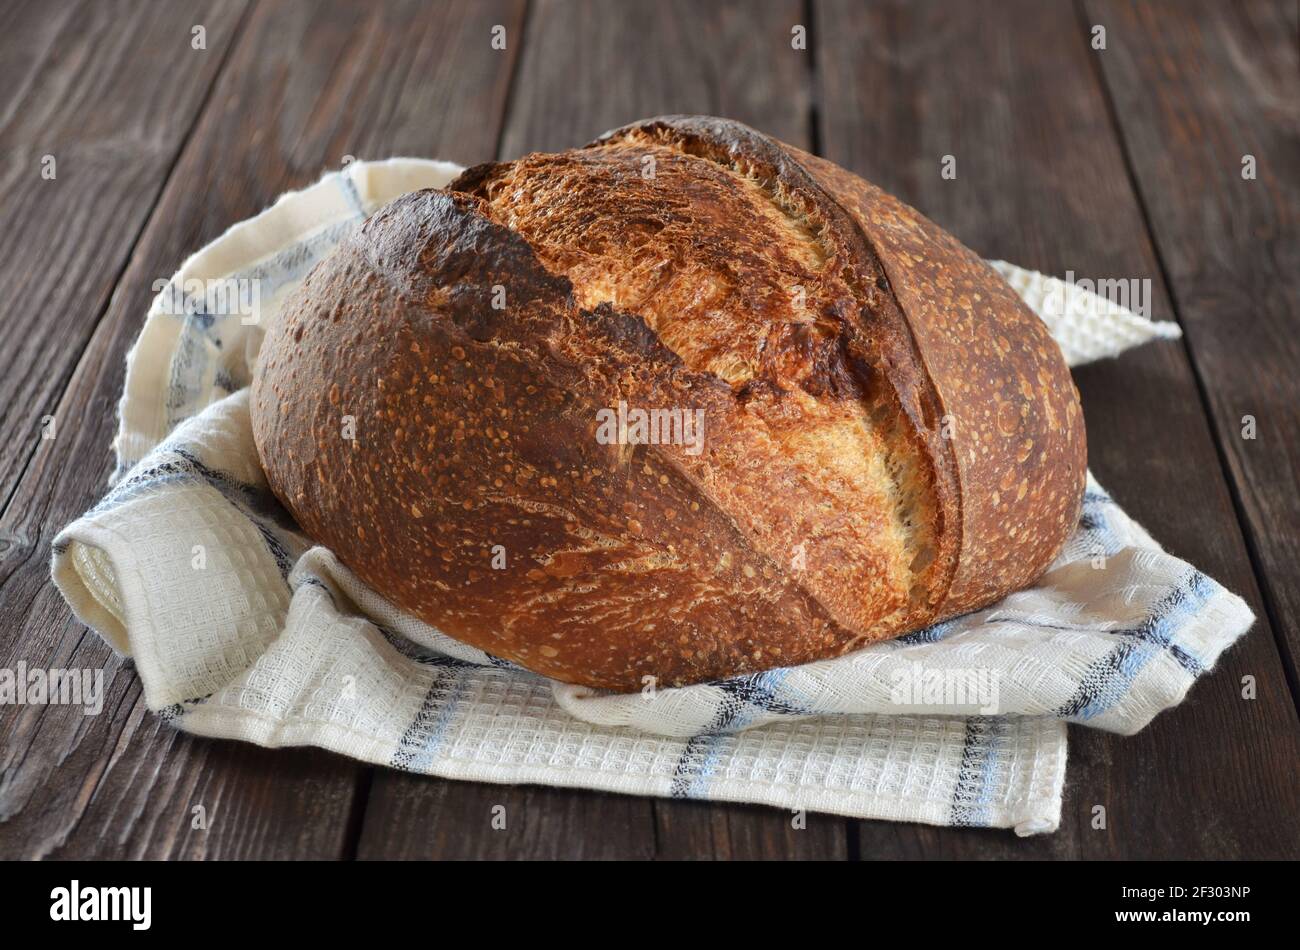 Rustic sourdough bread with a crisp crust on a kitchen towel close-up Stock Photo